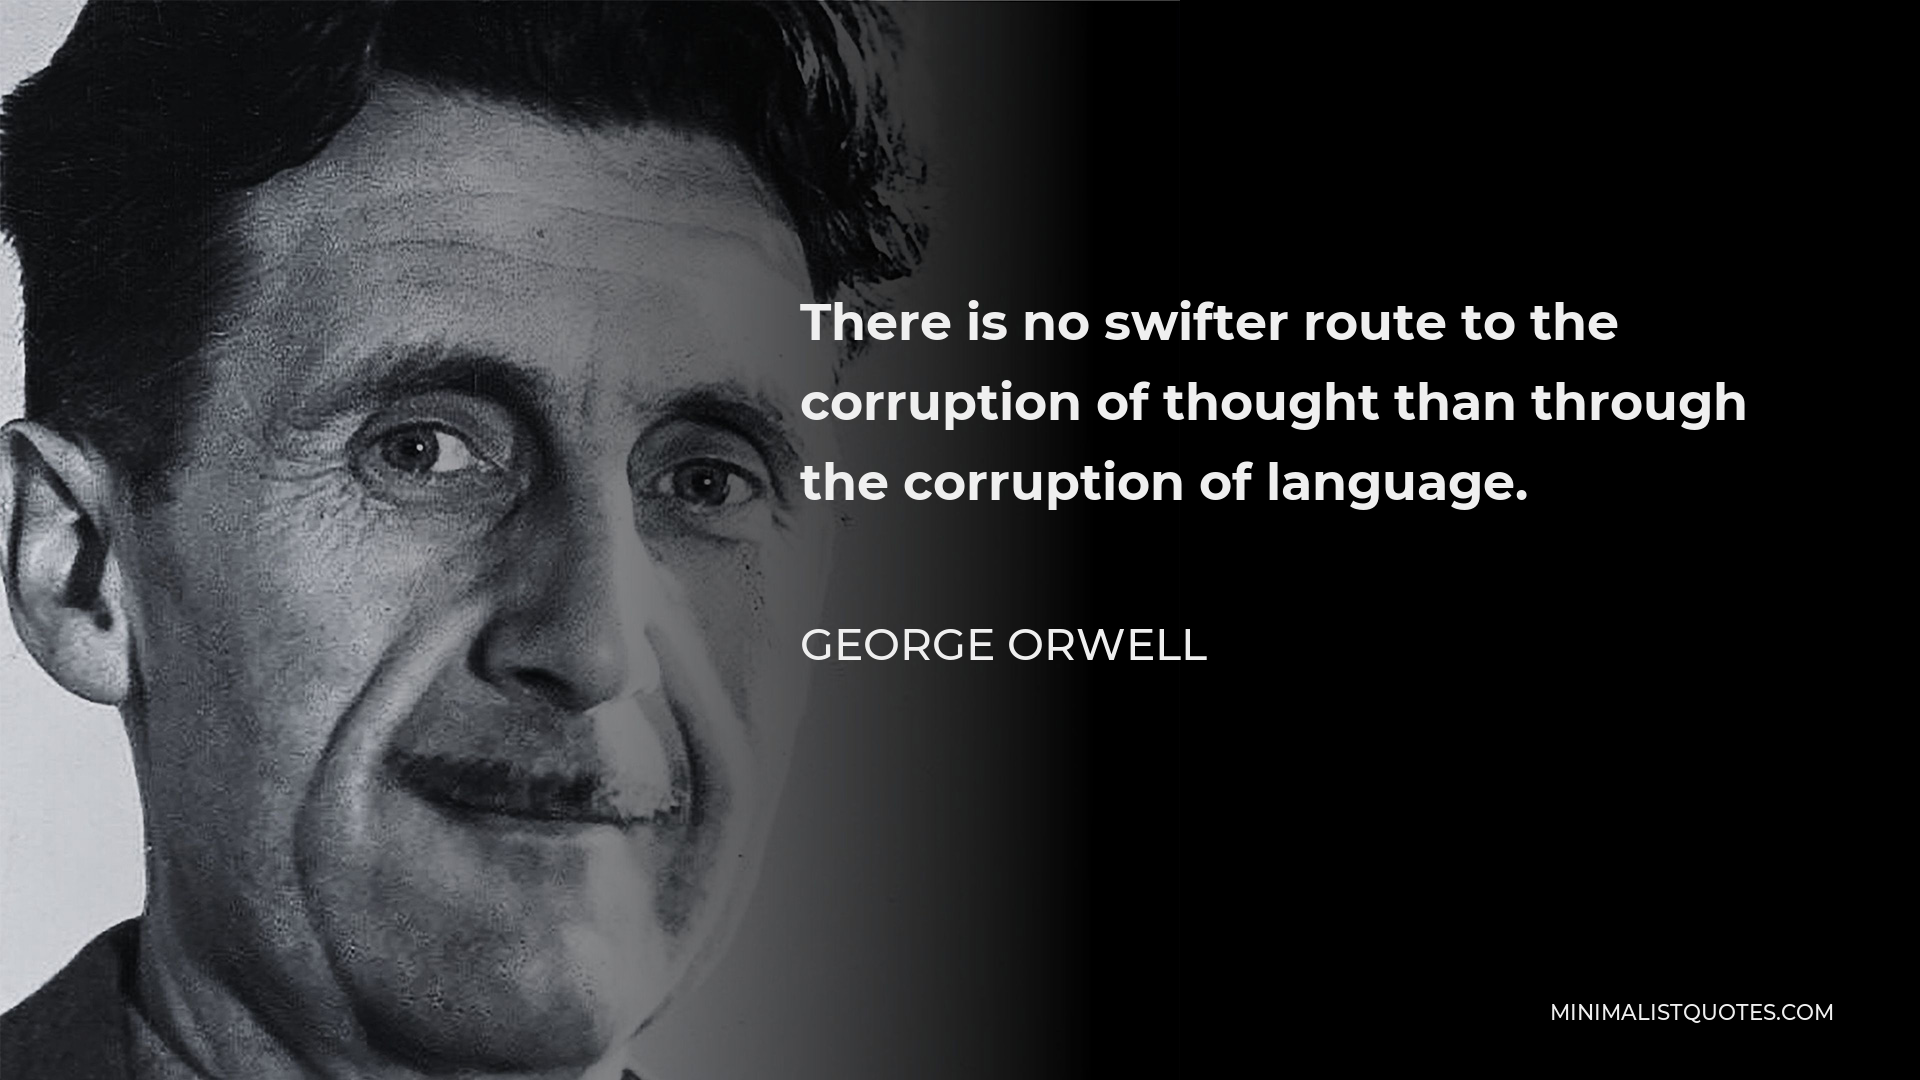 George Orwell Quote - There is no swifter route to the corruption of thought than through the corruption of language.